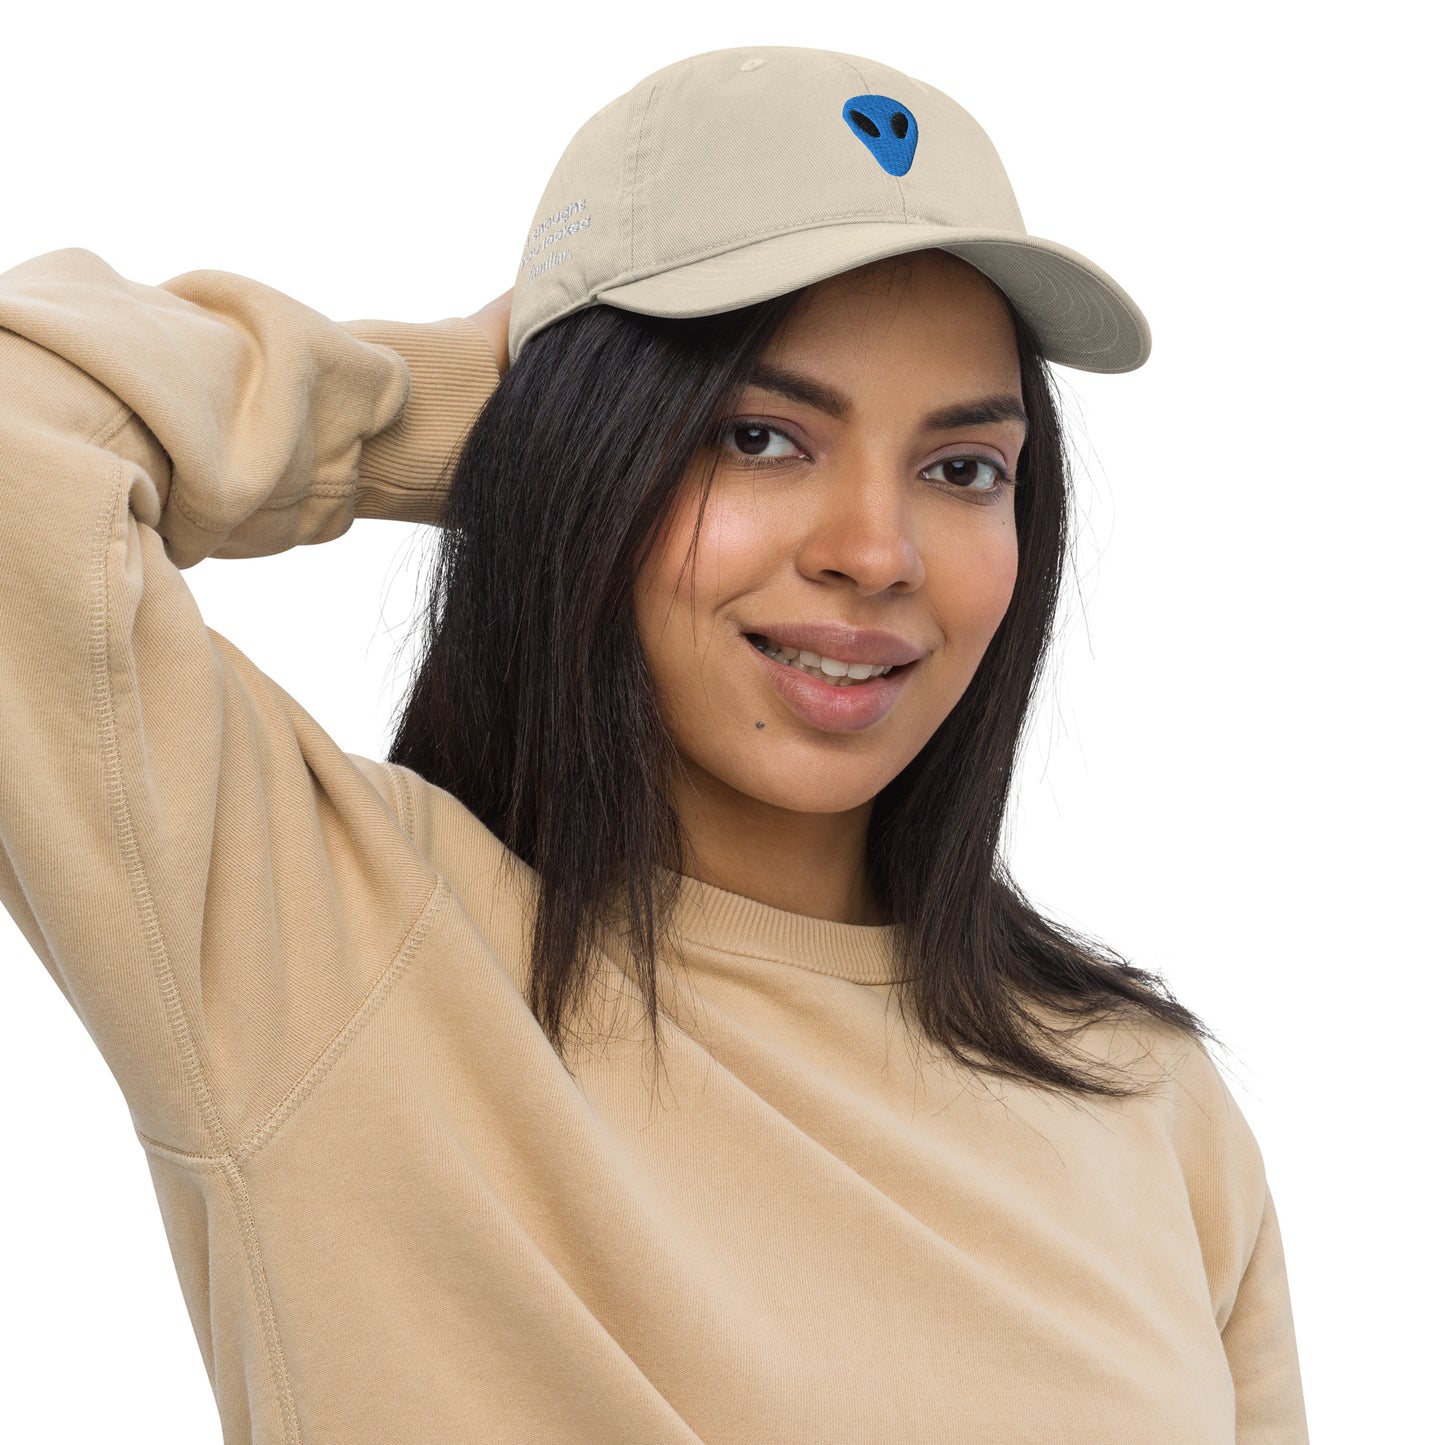 Blue Alien I thought you looked familiar Organic Cotton Dad Hat